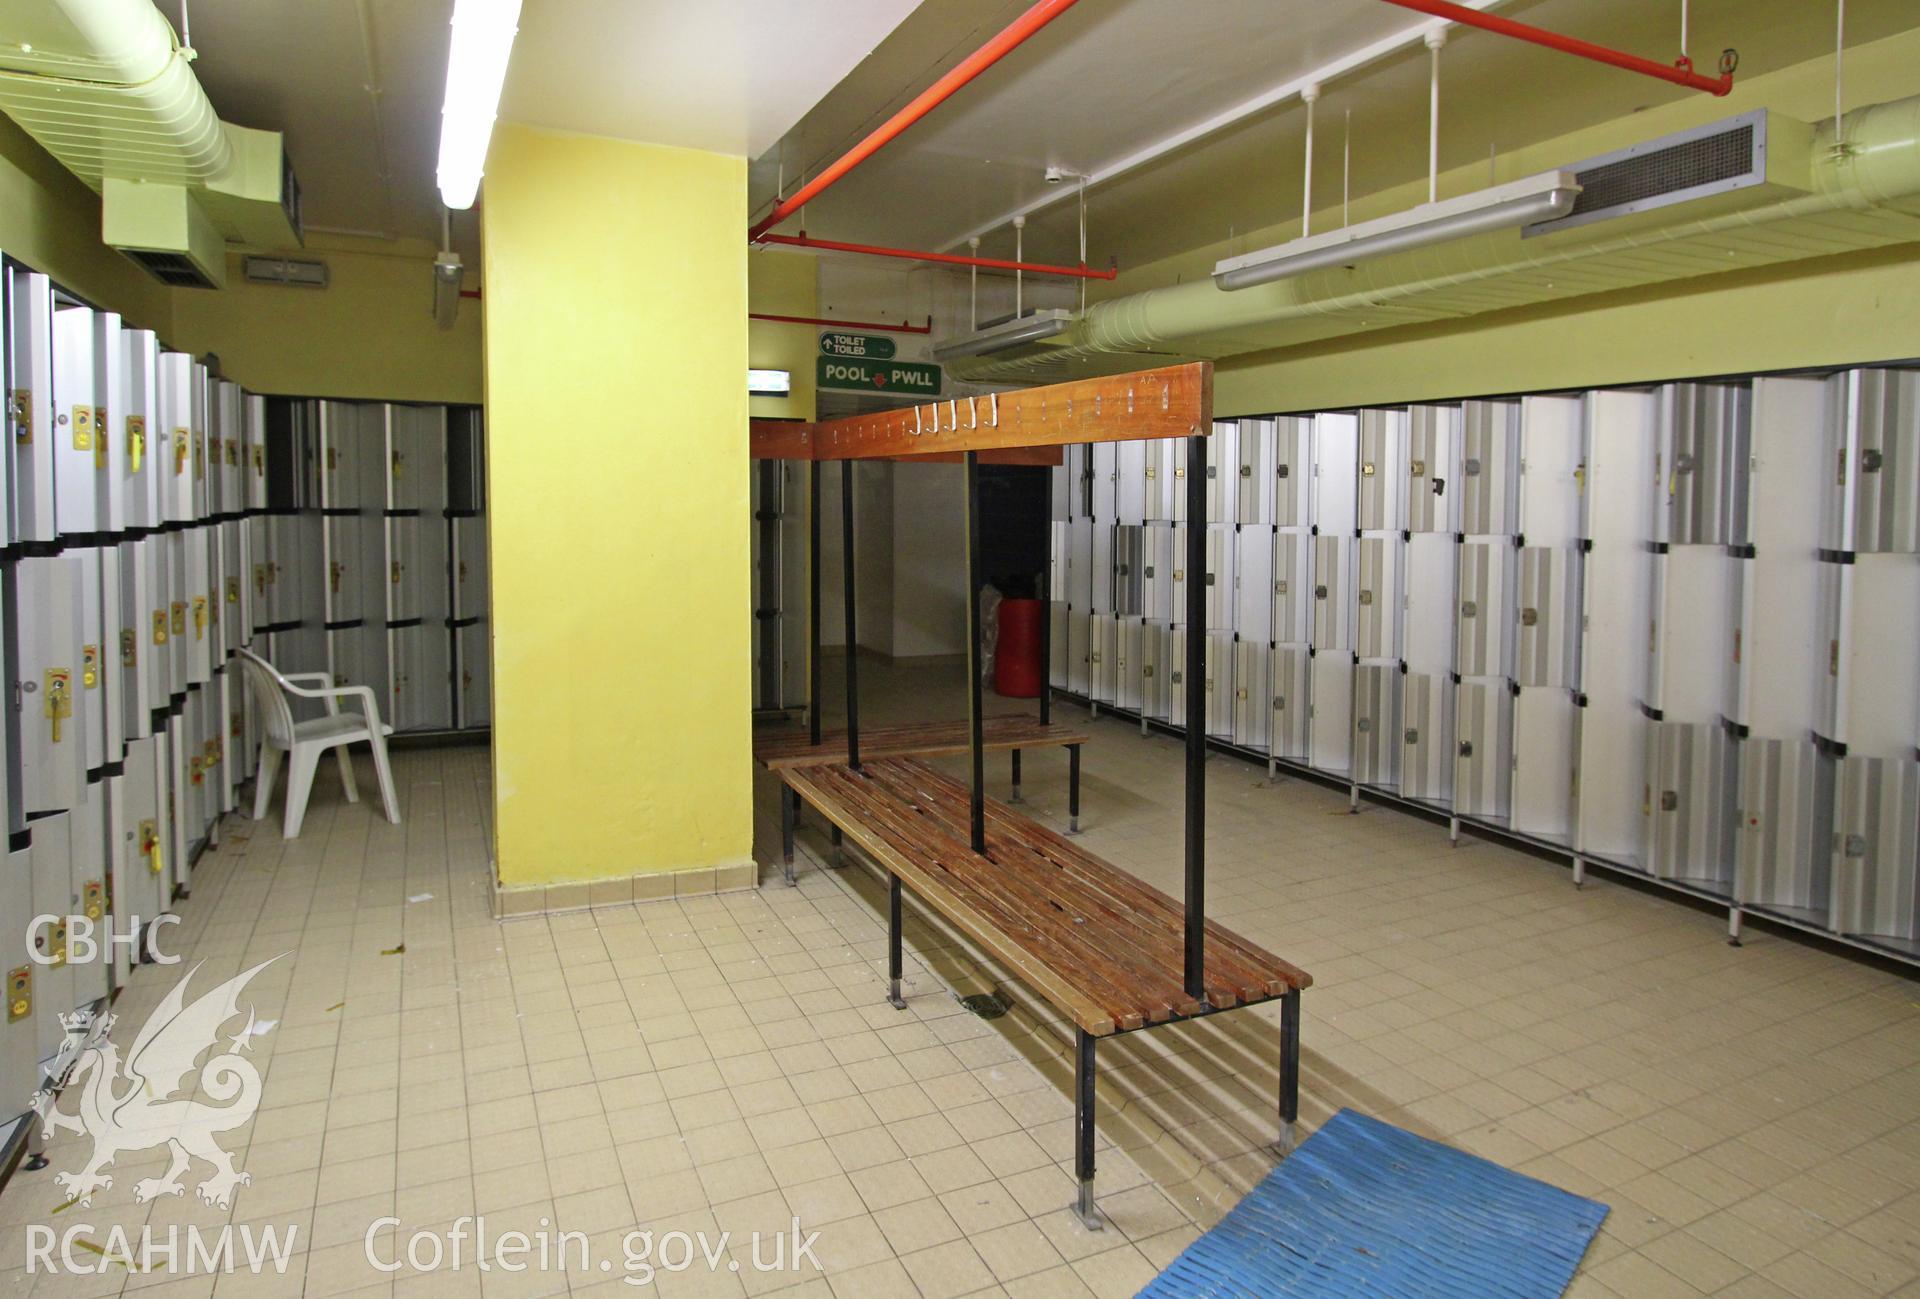 The changing room at Rhyl Sun Centre, taken by Sue Fielding, 27th May 2016.